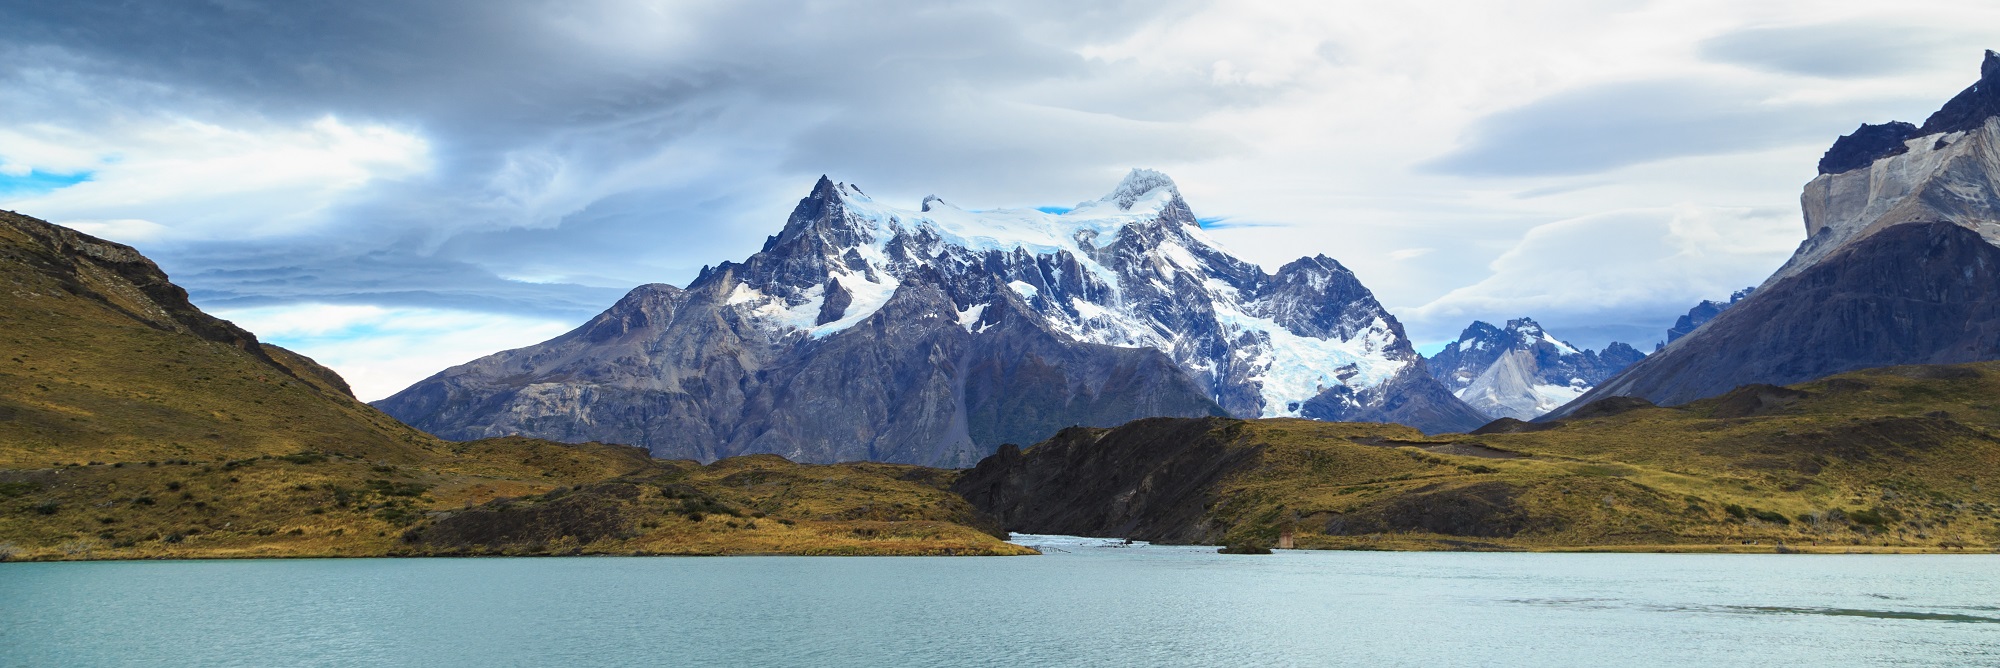 brud Moske Stramme Lonely Planet names Chile the Best Country to Visit in 2018 - Chile Travel